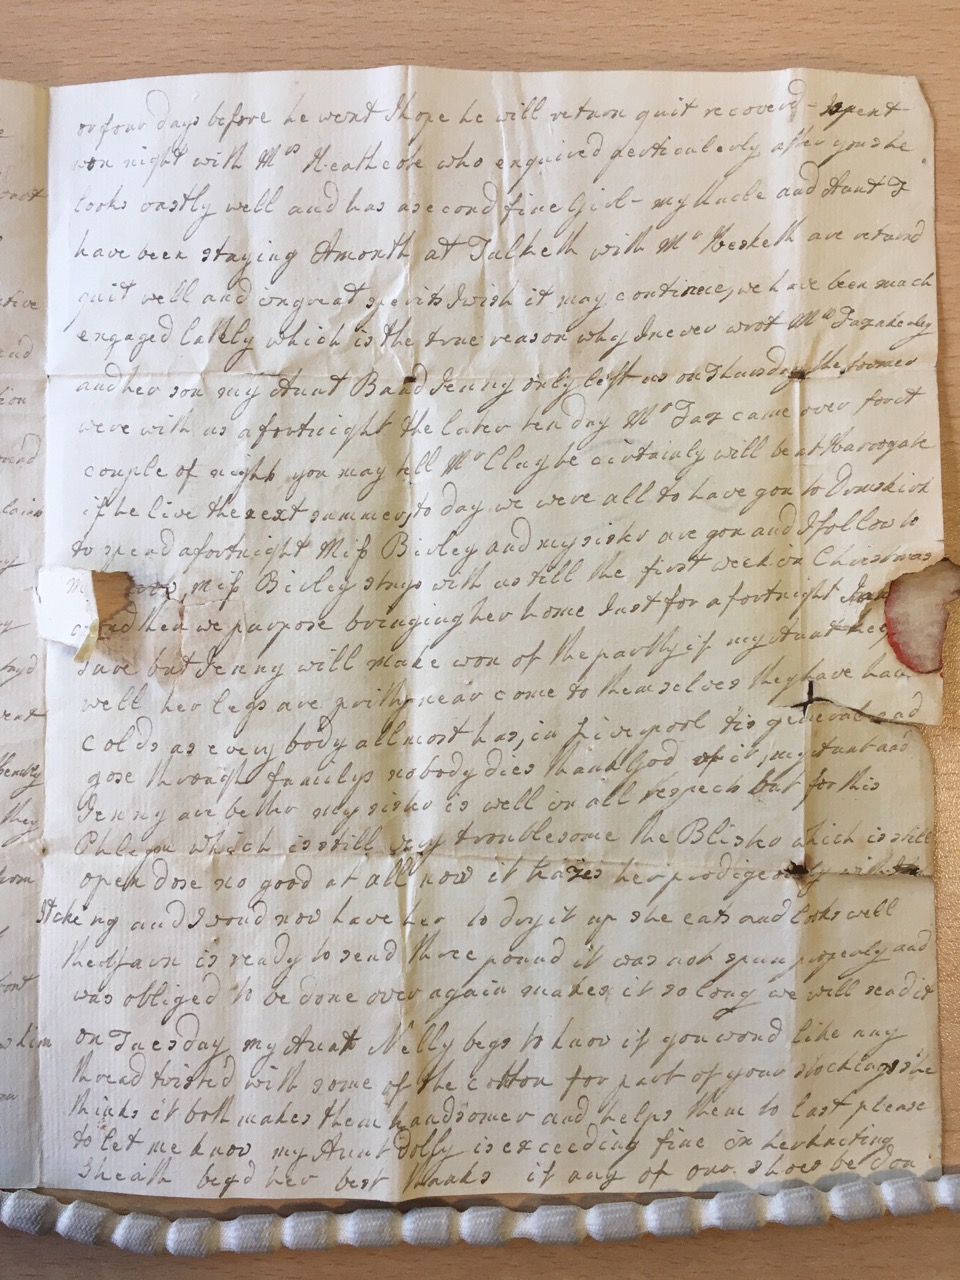 Image #3 of letter: Mary Ann Hesketh to Ann Hare, 2 December